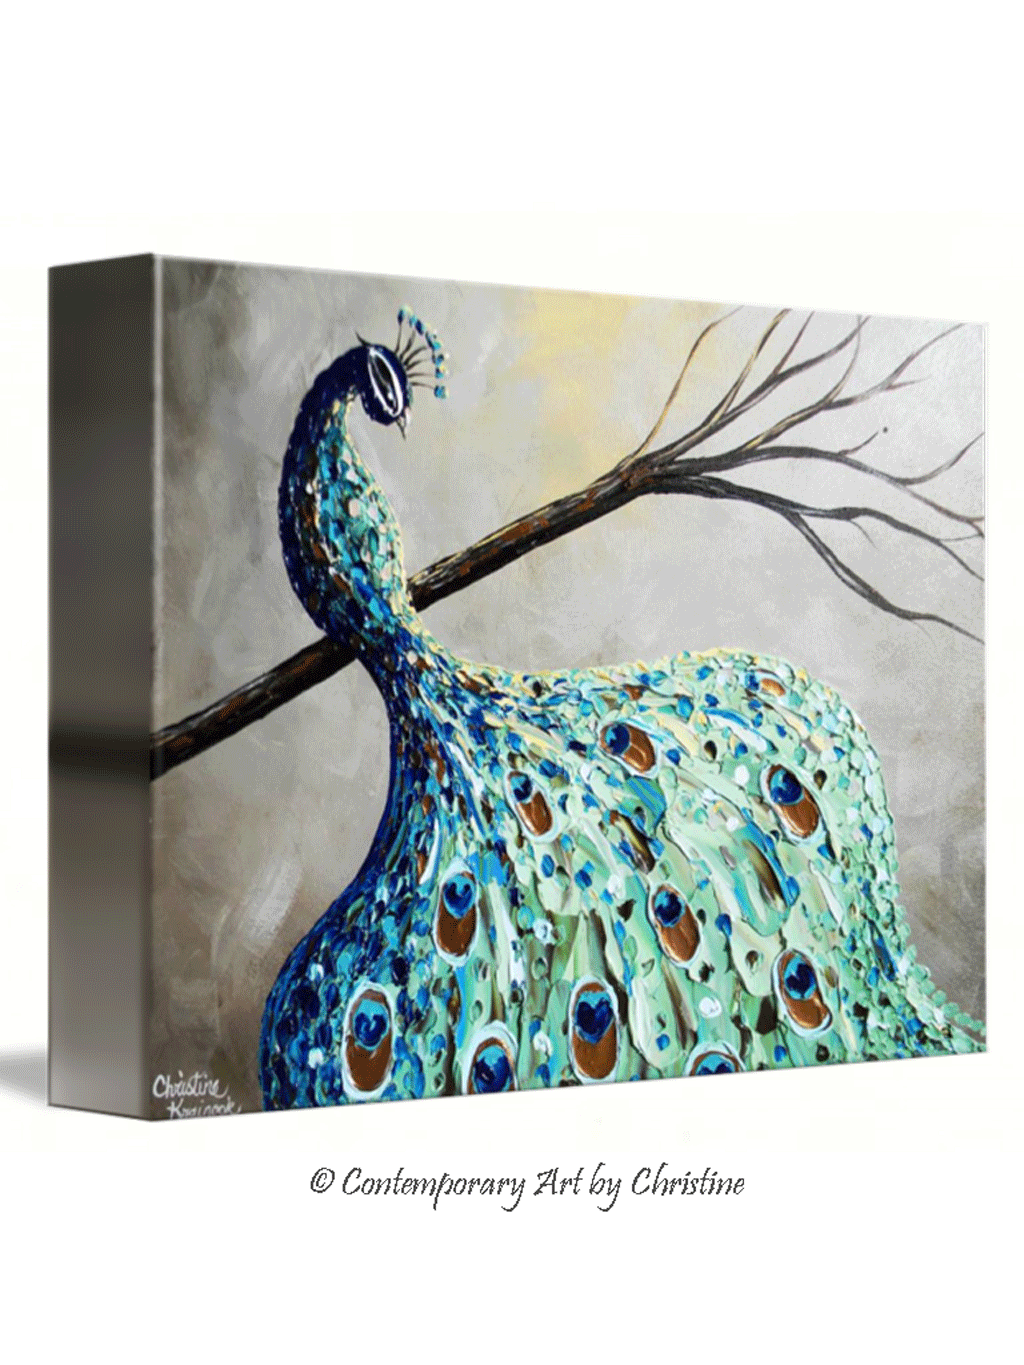 Load image into Gallery viewer, GICLEE PRINT Art Abstract Peacock Painting Modern Canvas Prints Blue Green Grey Brown Gold Bird - Christine Krainock Art - Contemporary Art by Christine - 5
